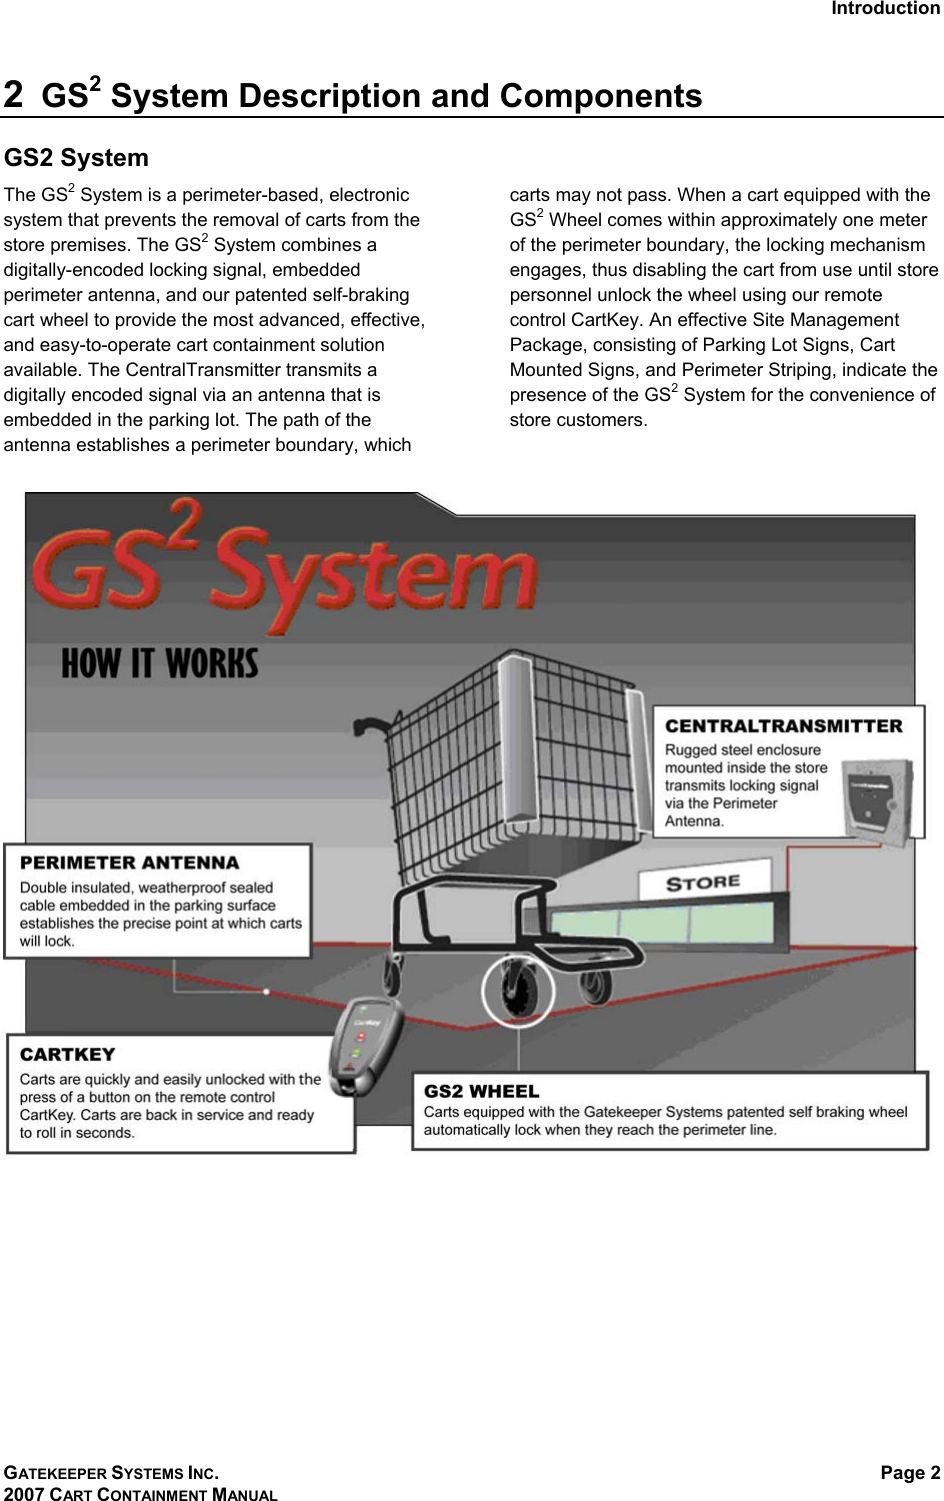 Introduction GATEKEEPER SYSTEMS INC. 2007 CART CONTAINMENT MANUAL Page 2  2  GS2 System Description and Components GS2 System The GS2 System is a perimeter-based, electronic system that prevents the removal of carts from the store premises. The GS2 System combines a digitally-encoded locking signal, embedded perimeter antenna, and our patented self-braking cart wheel to provide the most advanced, effective, and easy-to-operate cart containment solution available. The CentralTransmitter transmits a digitally encoded signal via an antenna that is embedded in the parking lot. The path of the antenna establishes a perimeter boundary, which carts may not pass. When a cart equipped with the GS2 Wheel comes within approximately one meter of the perimeter boundary, the locking mechanism engages, thus disabling the cart from use until store personnel unlock the wheel using our remote control CartKey. An effective Site Management Package, consisting of Parking Lot Signs, Cart Mounted Signs, and Perimeter Striping, indicate the presence of the GS2 System for the convenience of store customers.   